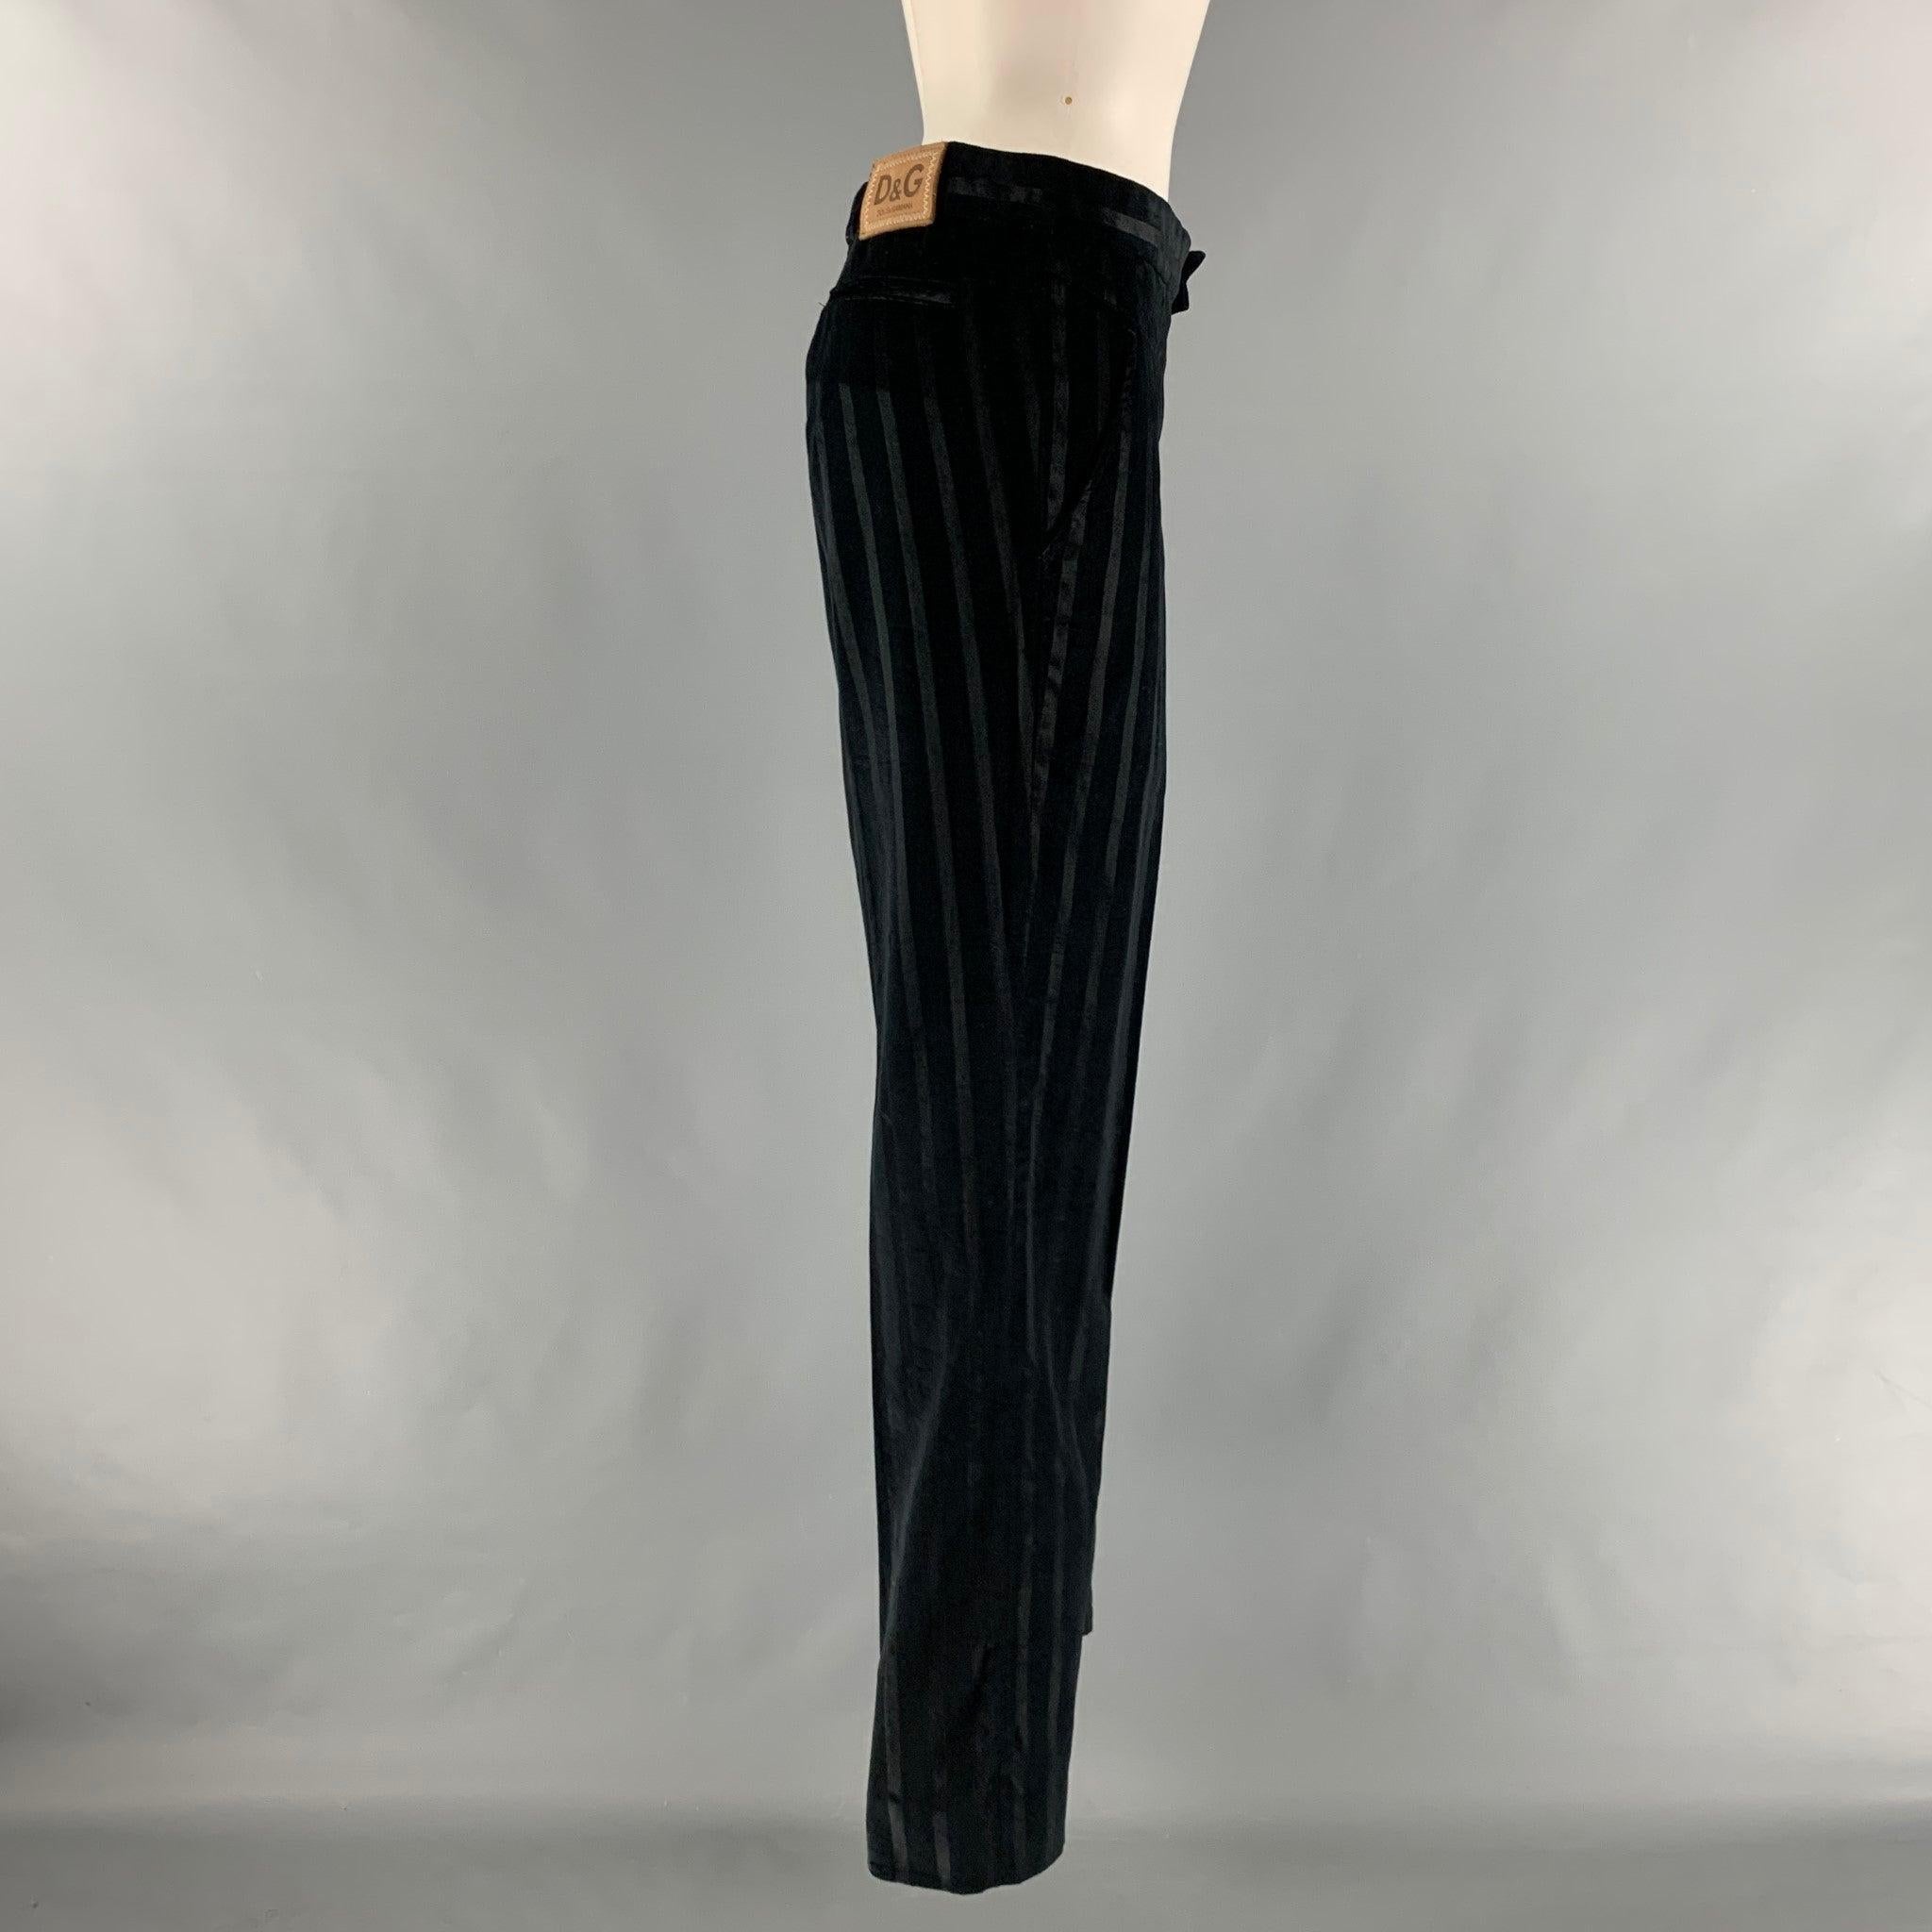 D&G by DOLCE & GABBANA Size 34 Black Stripe Cotton Viscose Dress Pants In Excellent Condition For Sale In San Francisco, CA